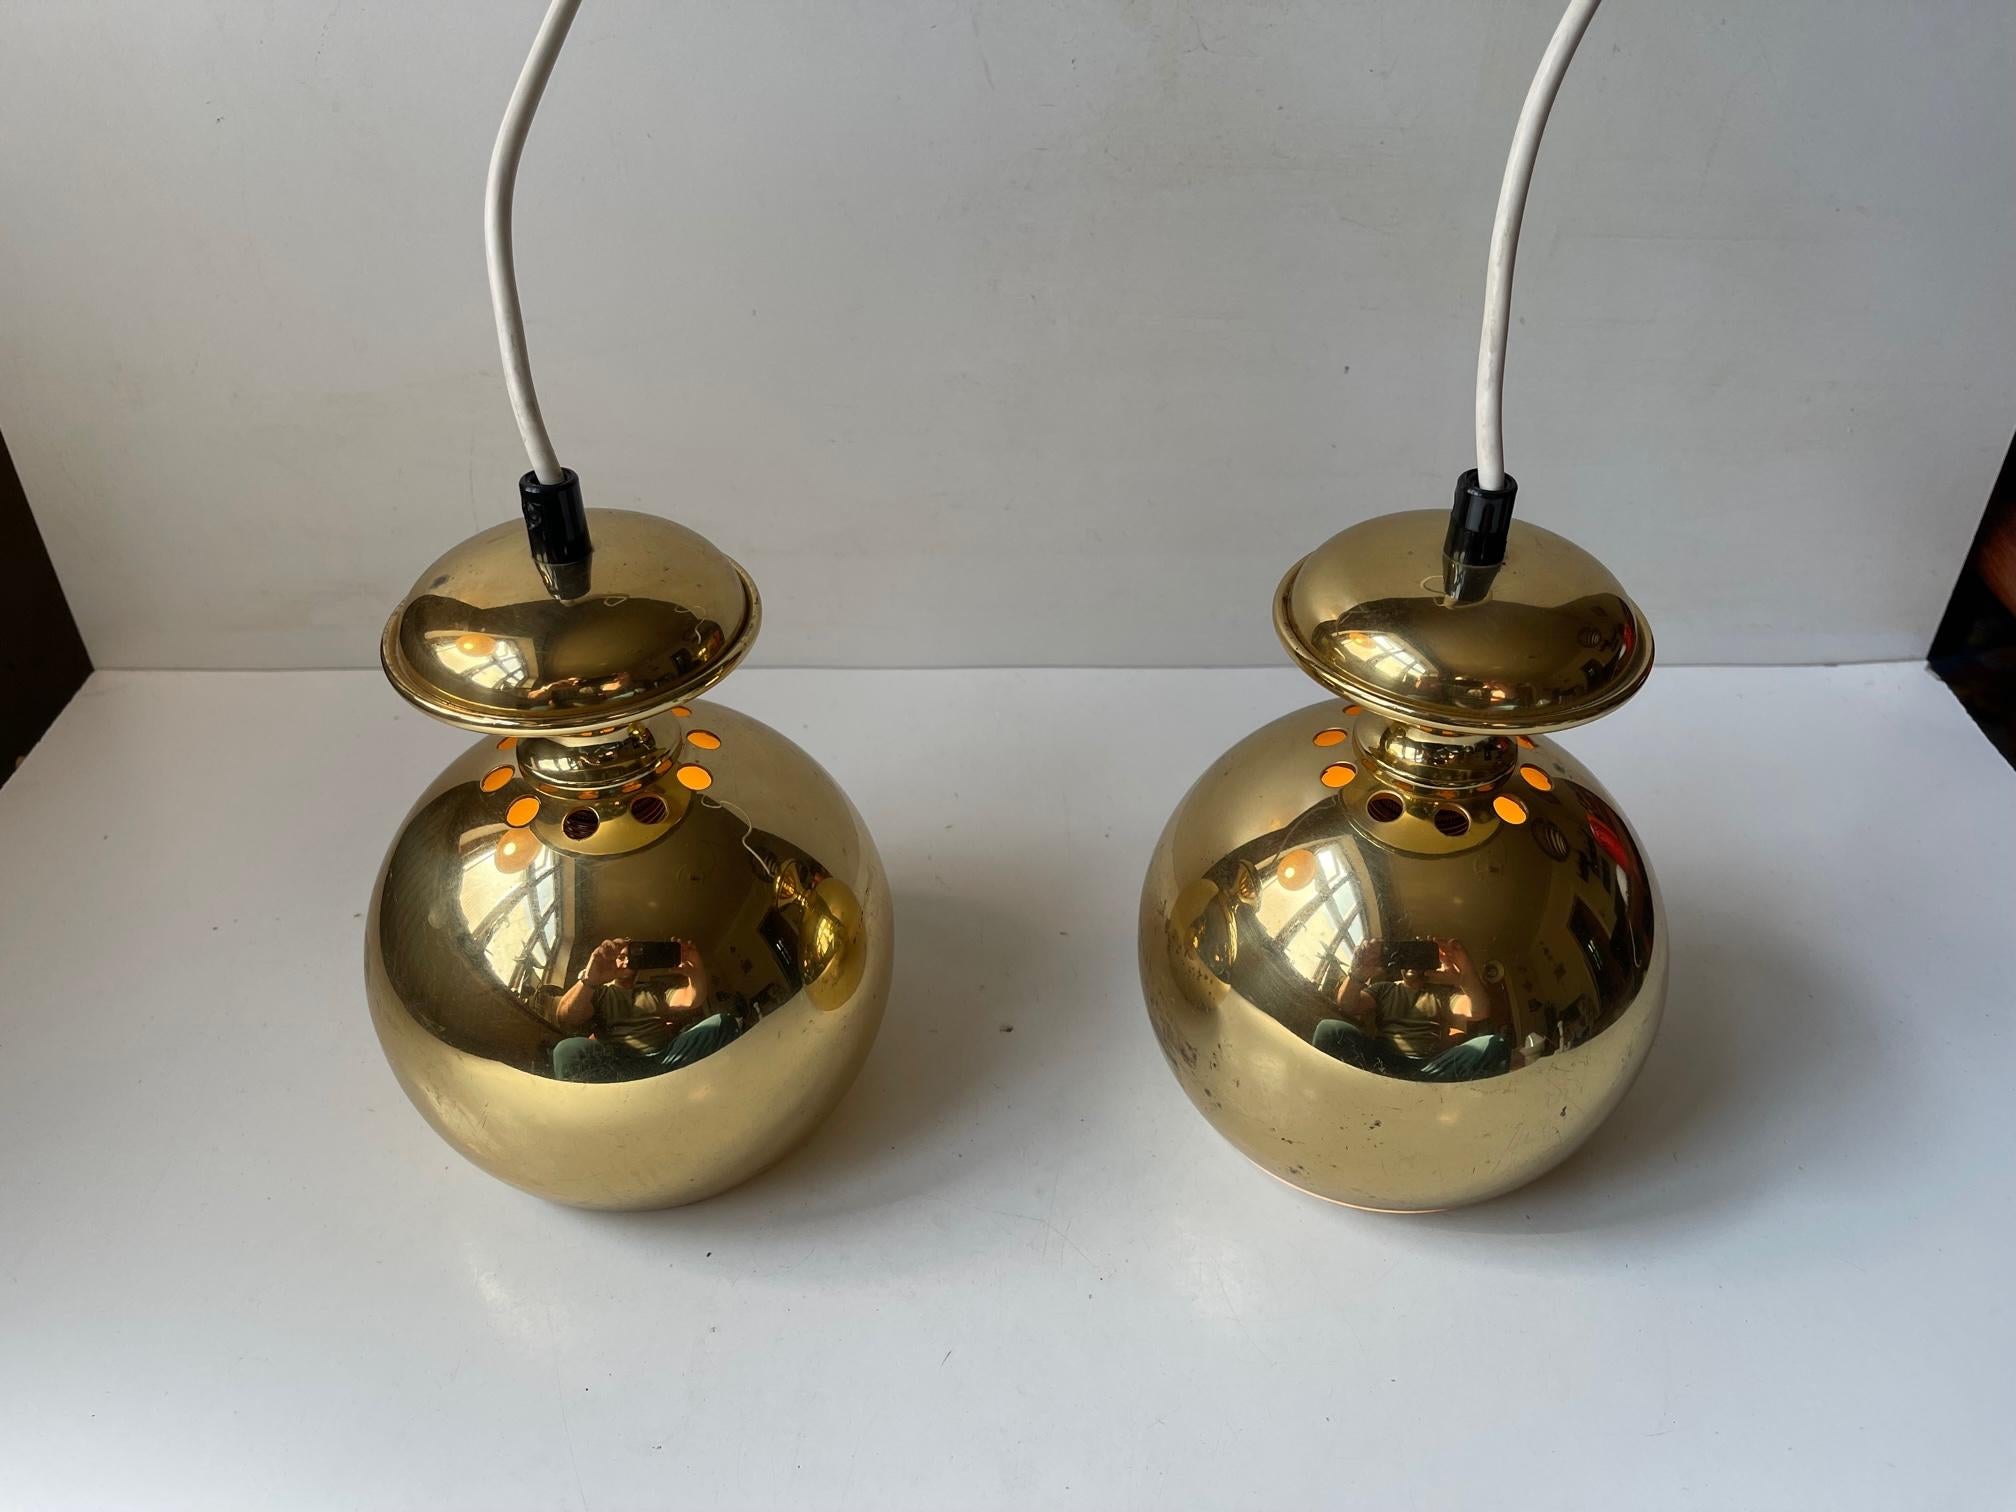 Scandinavian Modern Brass Hanging Lamps by Hans-Agne Jakobsson In Good Condition For Sale In Esbjerg, DK